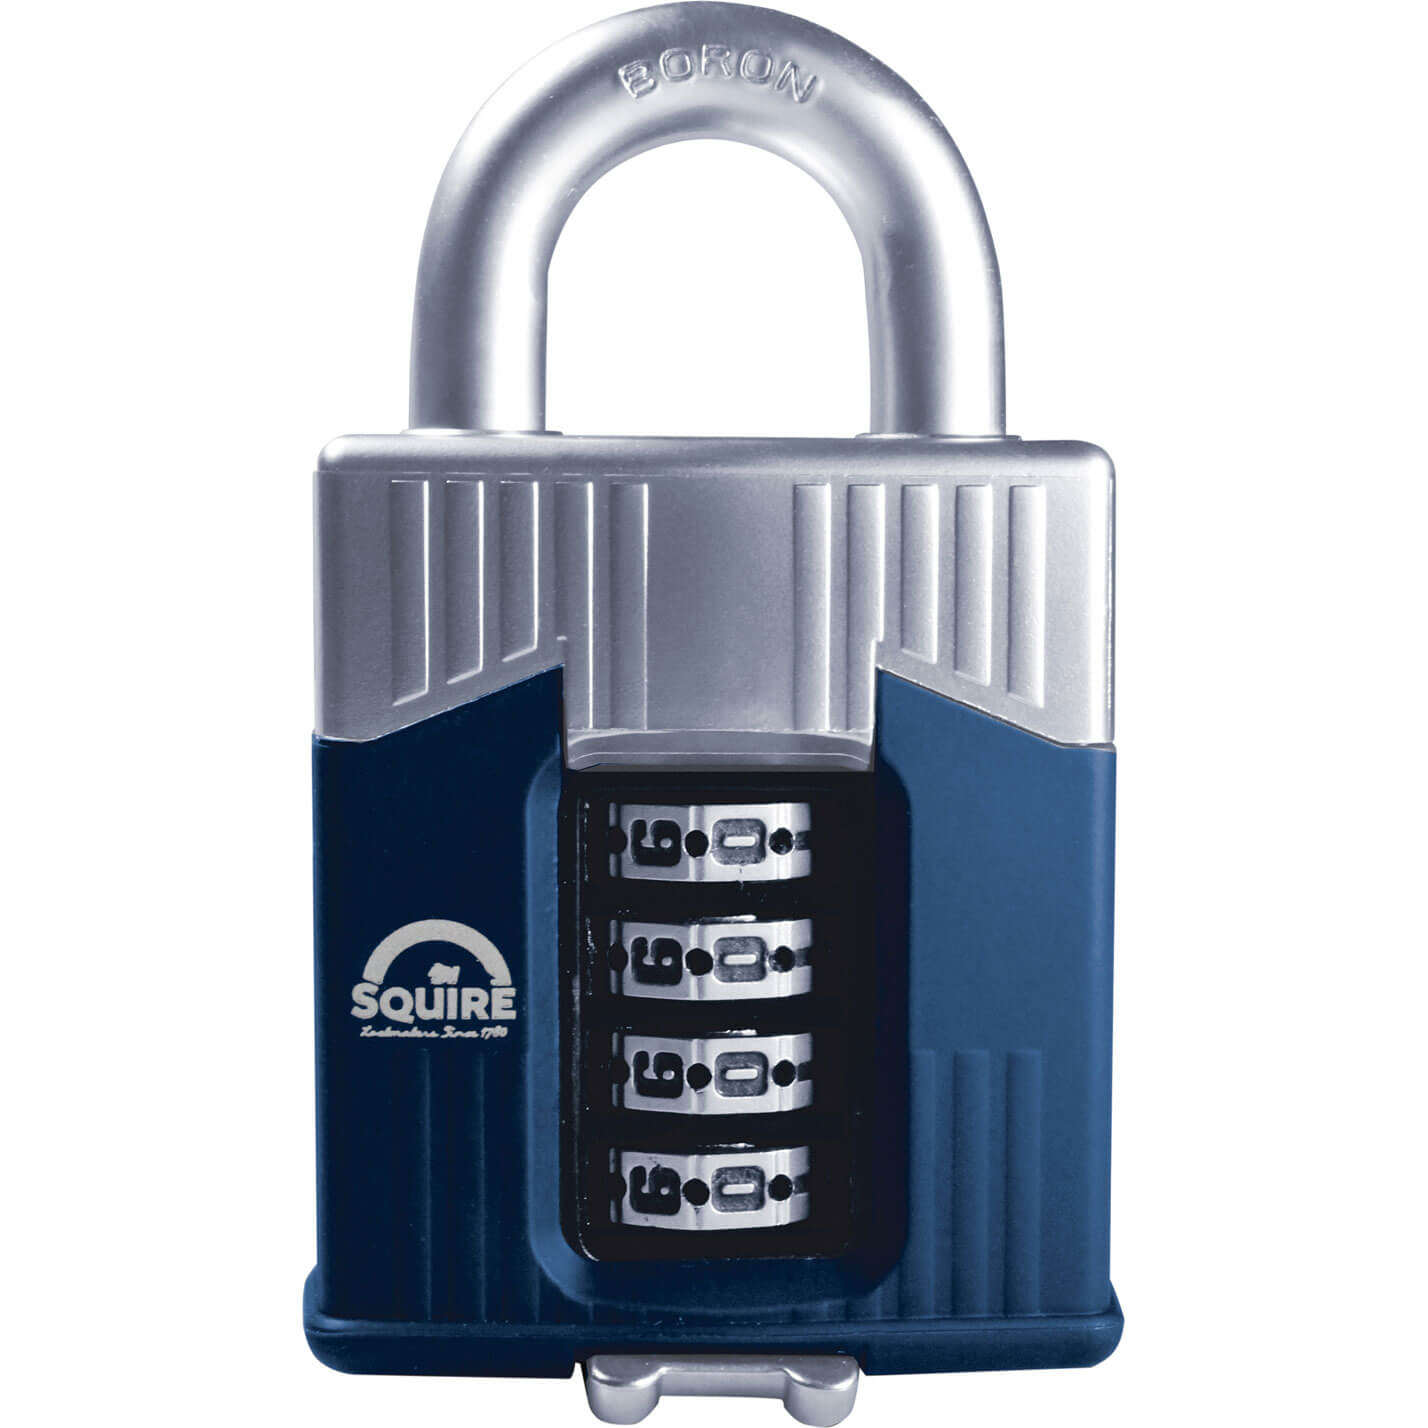 Image of Henry Squire Warrior High-Security Shackle Combination Padlock 55mm Standard